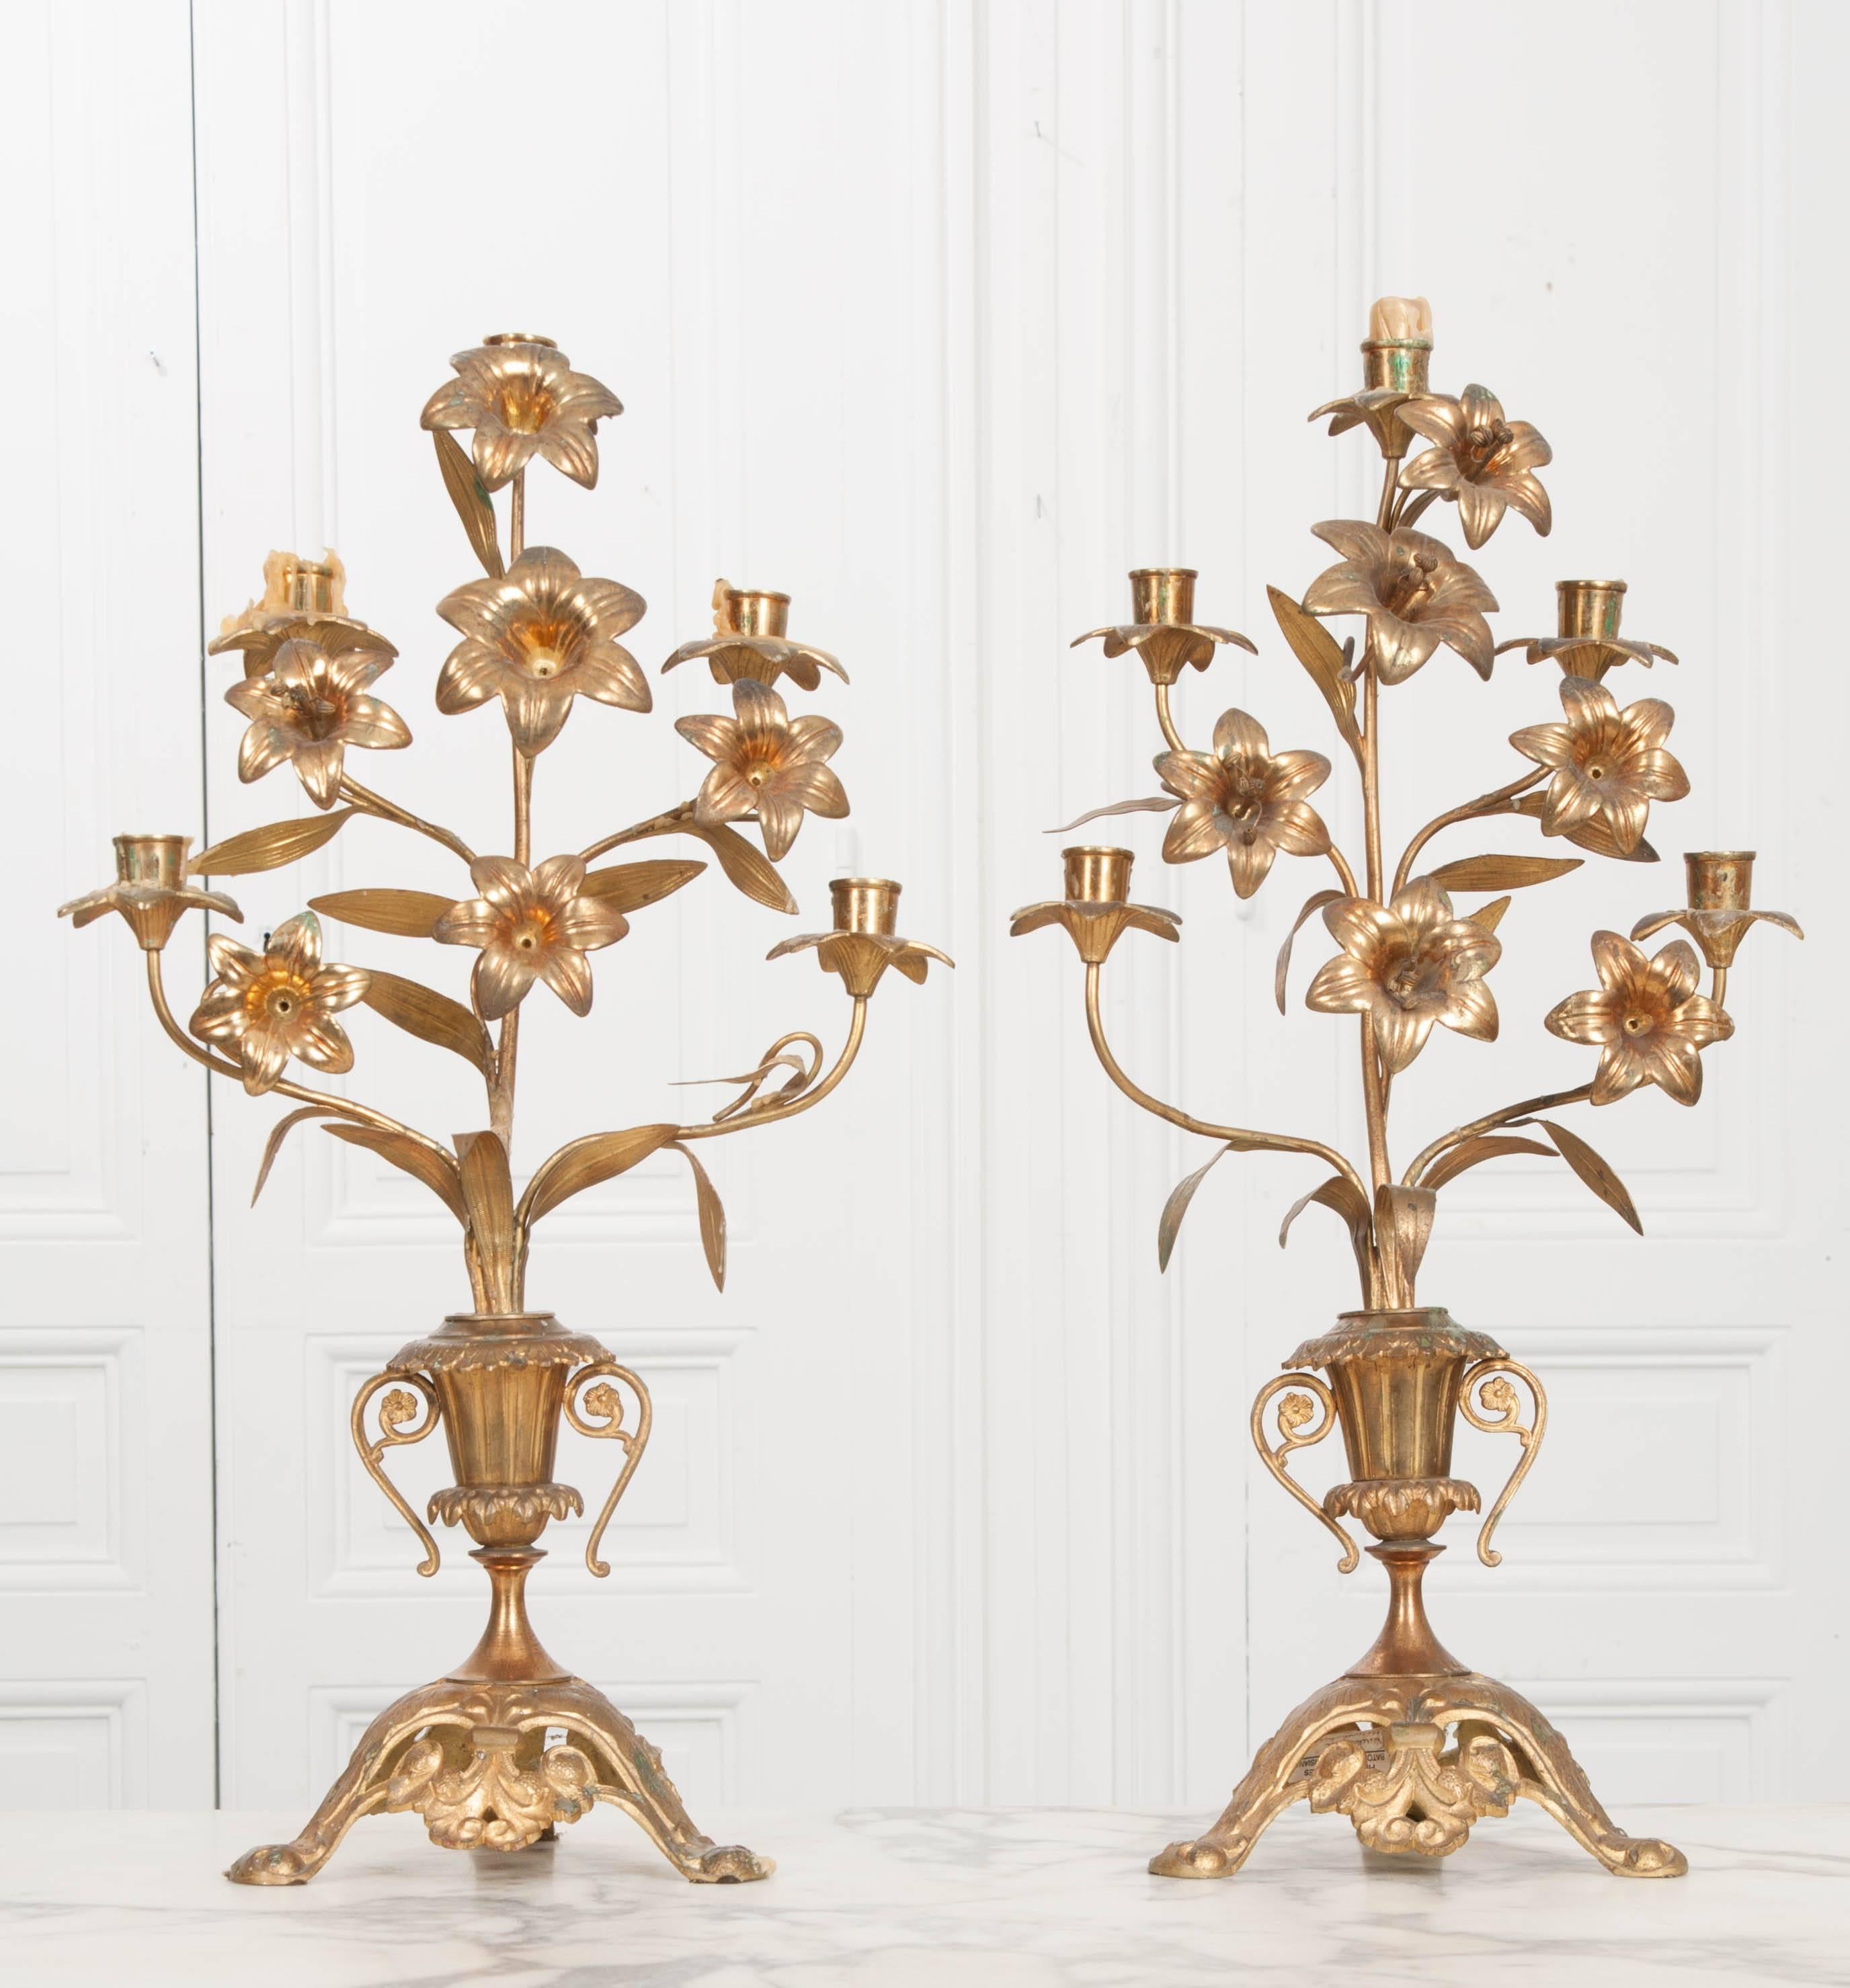 A pair of fine brass altar candelabras from 19th century France. Each candelabra holds five taper candles and are styled with wonderful brass lilies and foliage. The floral bouquet extends from a styled urn. The urn rests atop an ornately styled